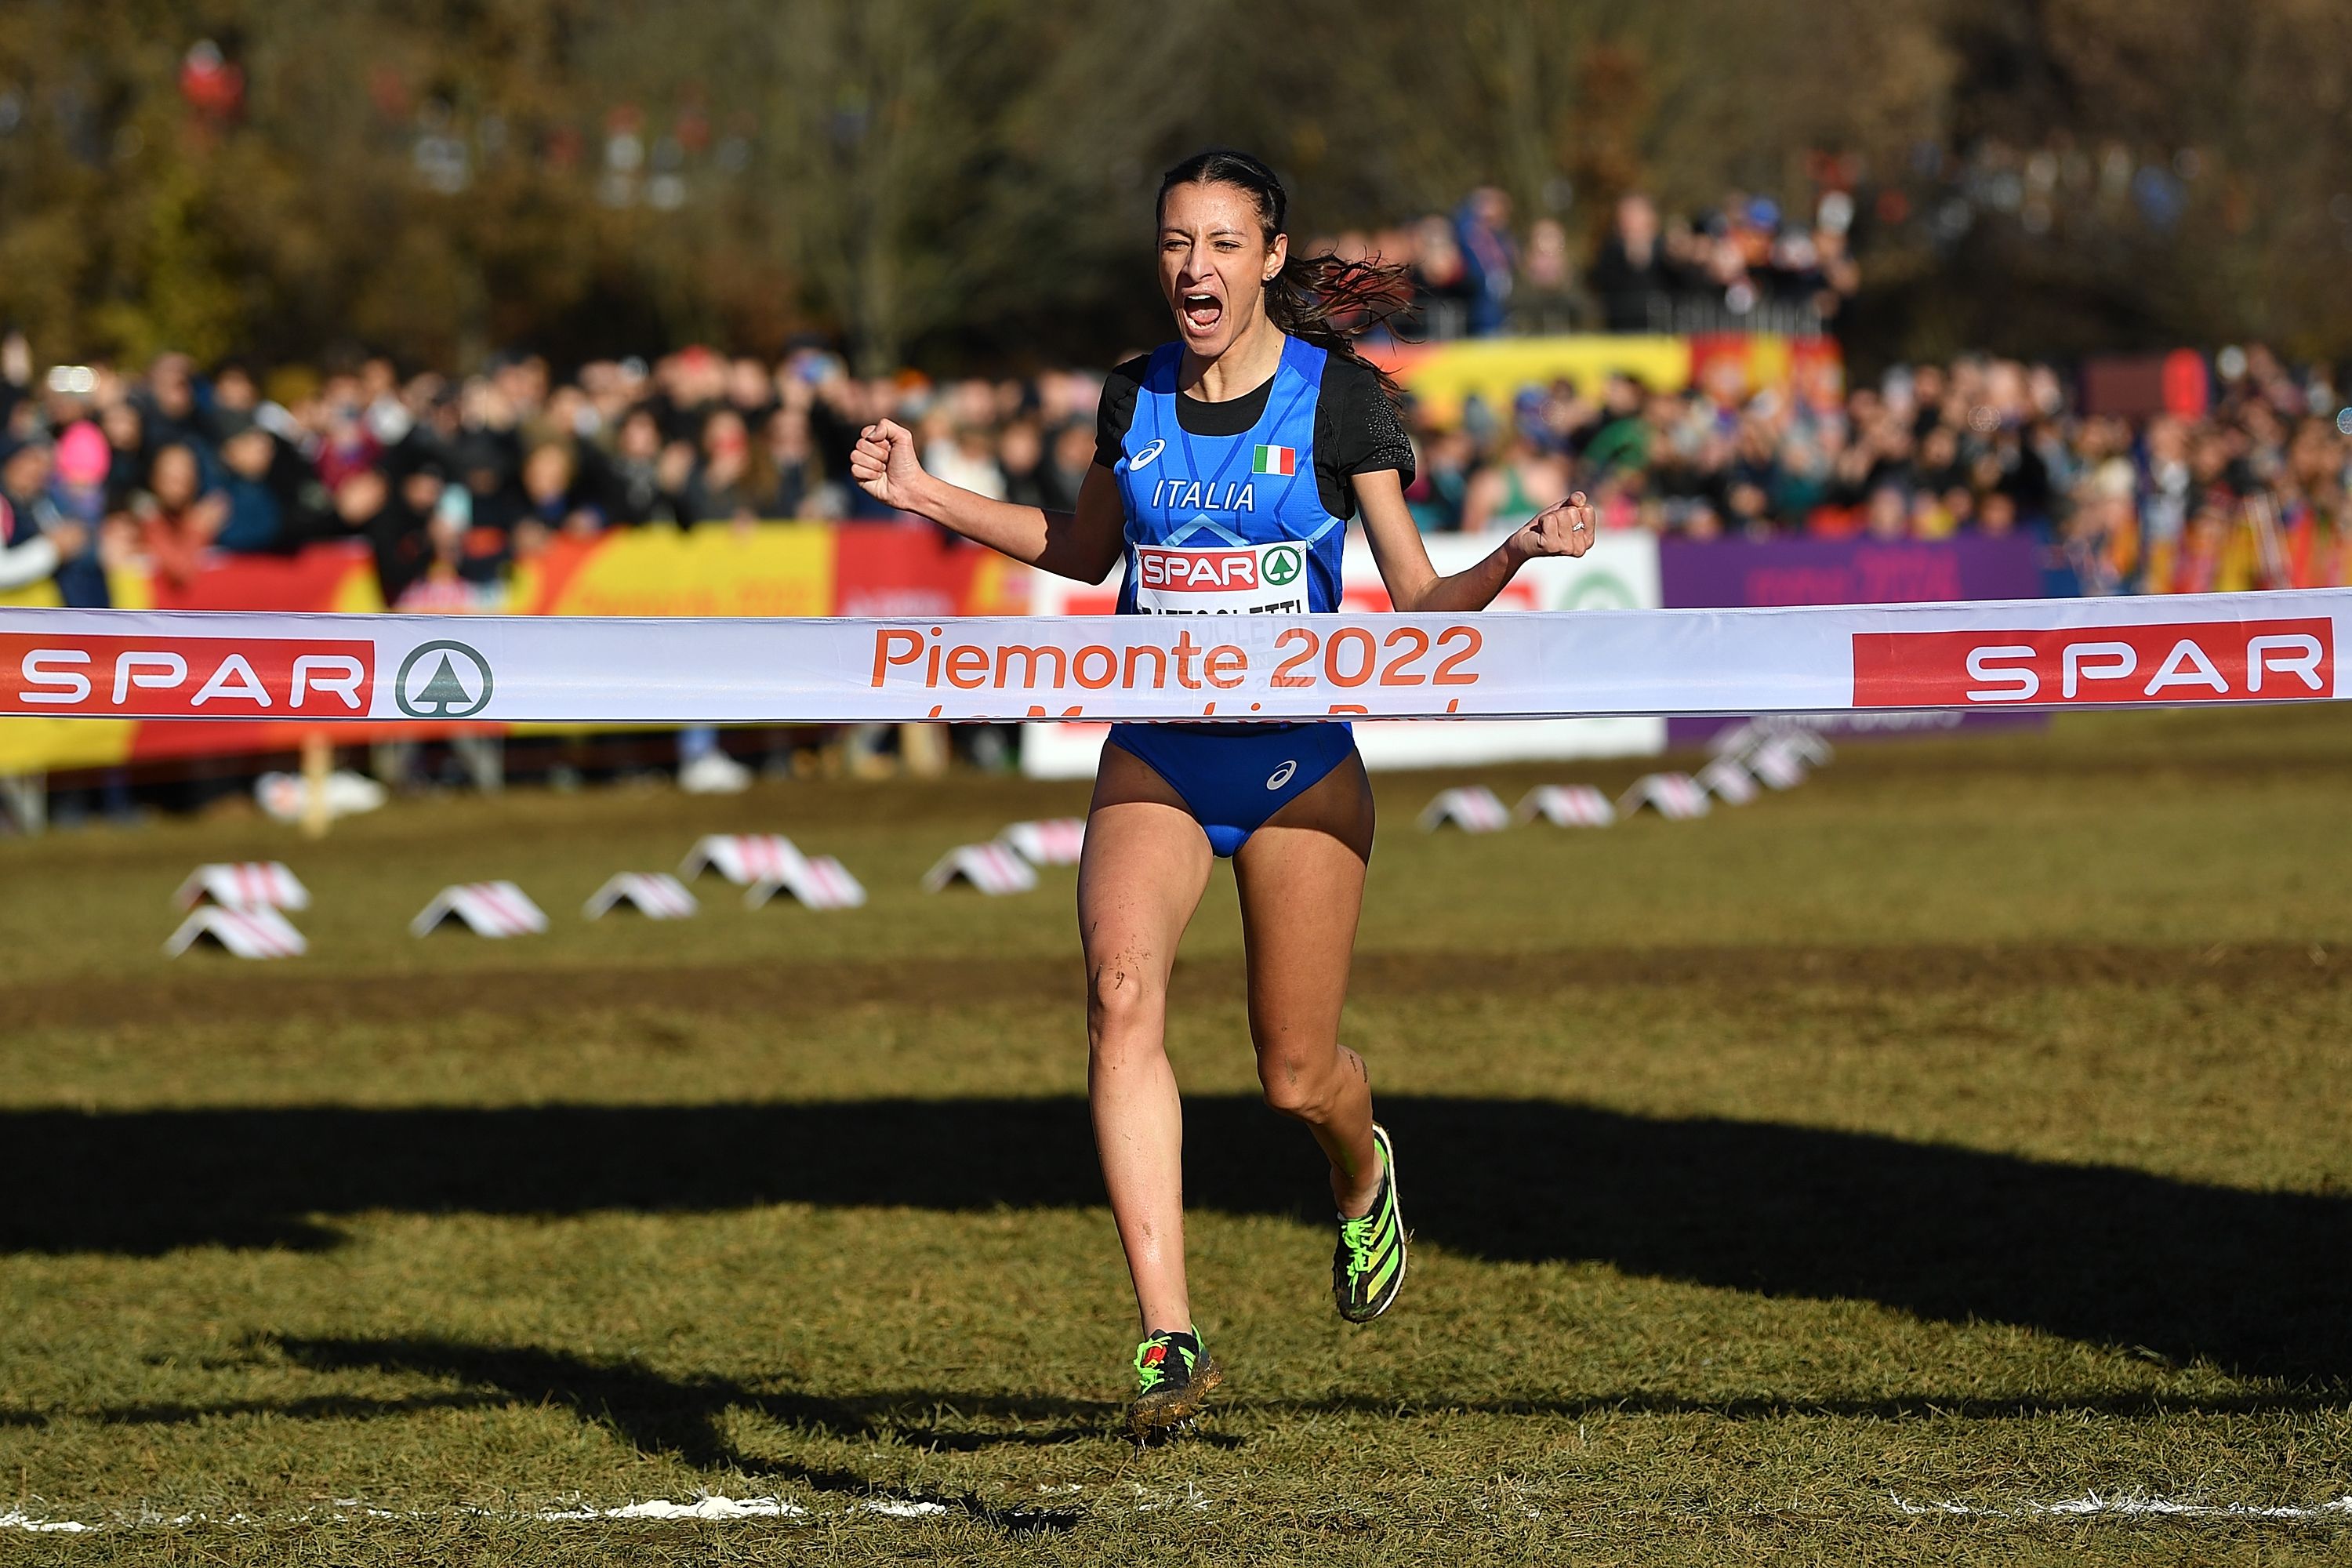 Nadia Battocletti wins at the 2022 European Cross Country Championships